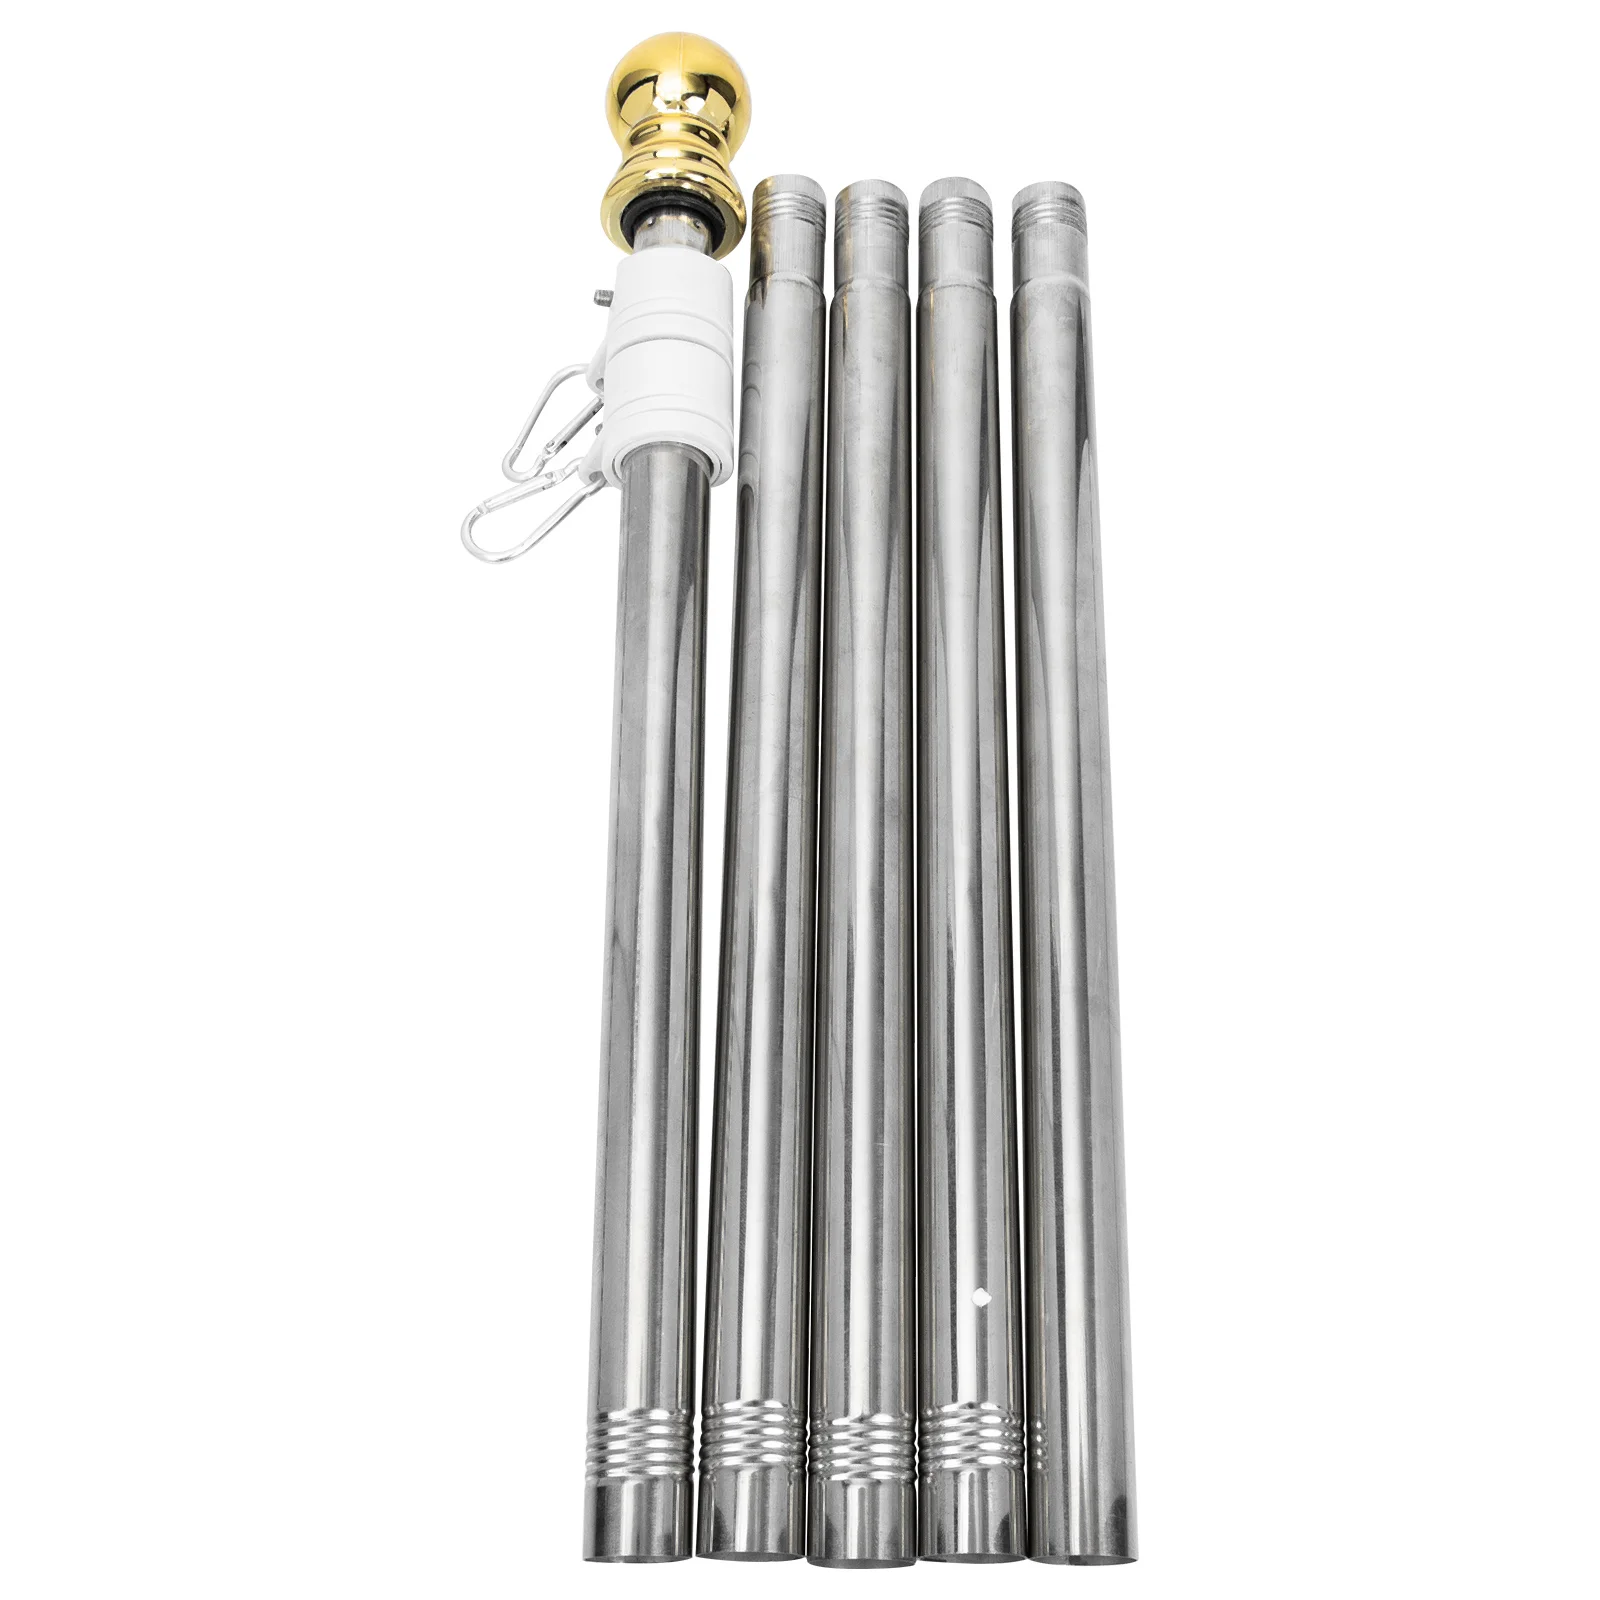 

House Stainless Steel Flagpole Yard Rustproof Rod Outdoor Anti-tangle Holder Stand Useful